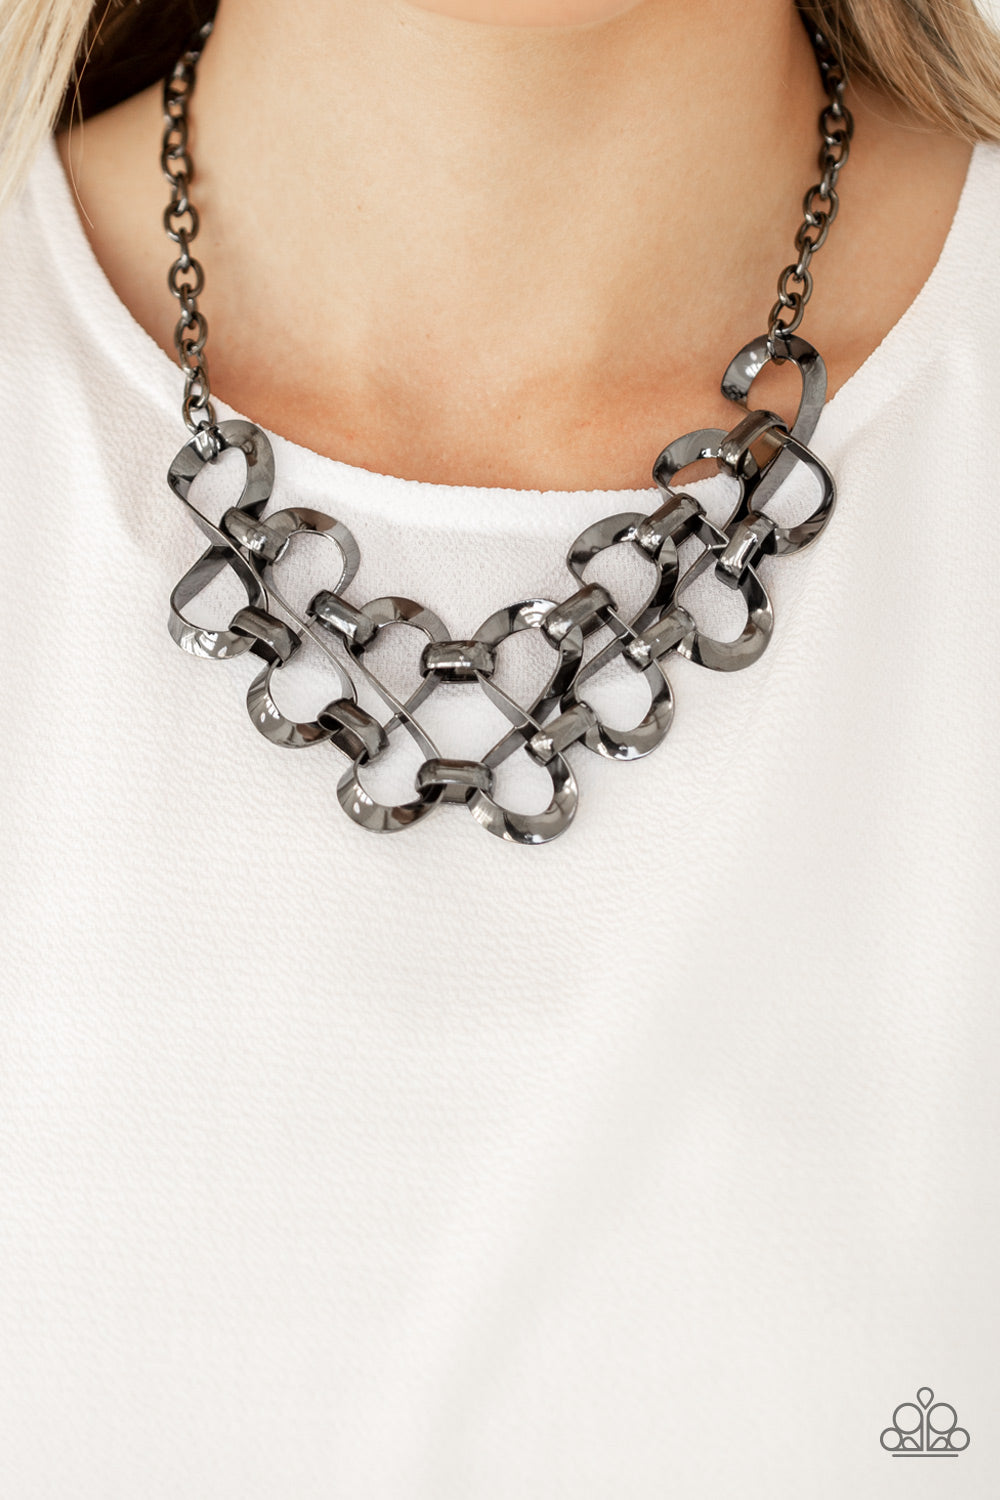 Paparazzi ♥ Work, Play, and Slay - Black ♥  Necklace